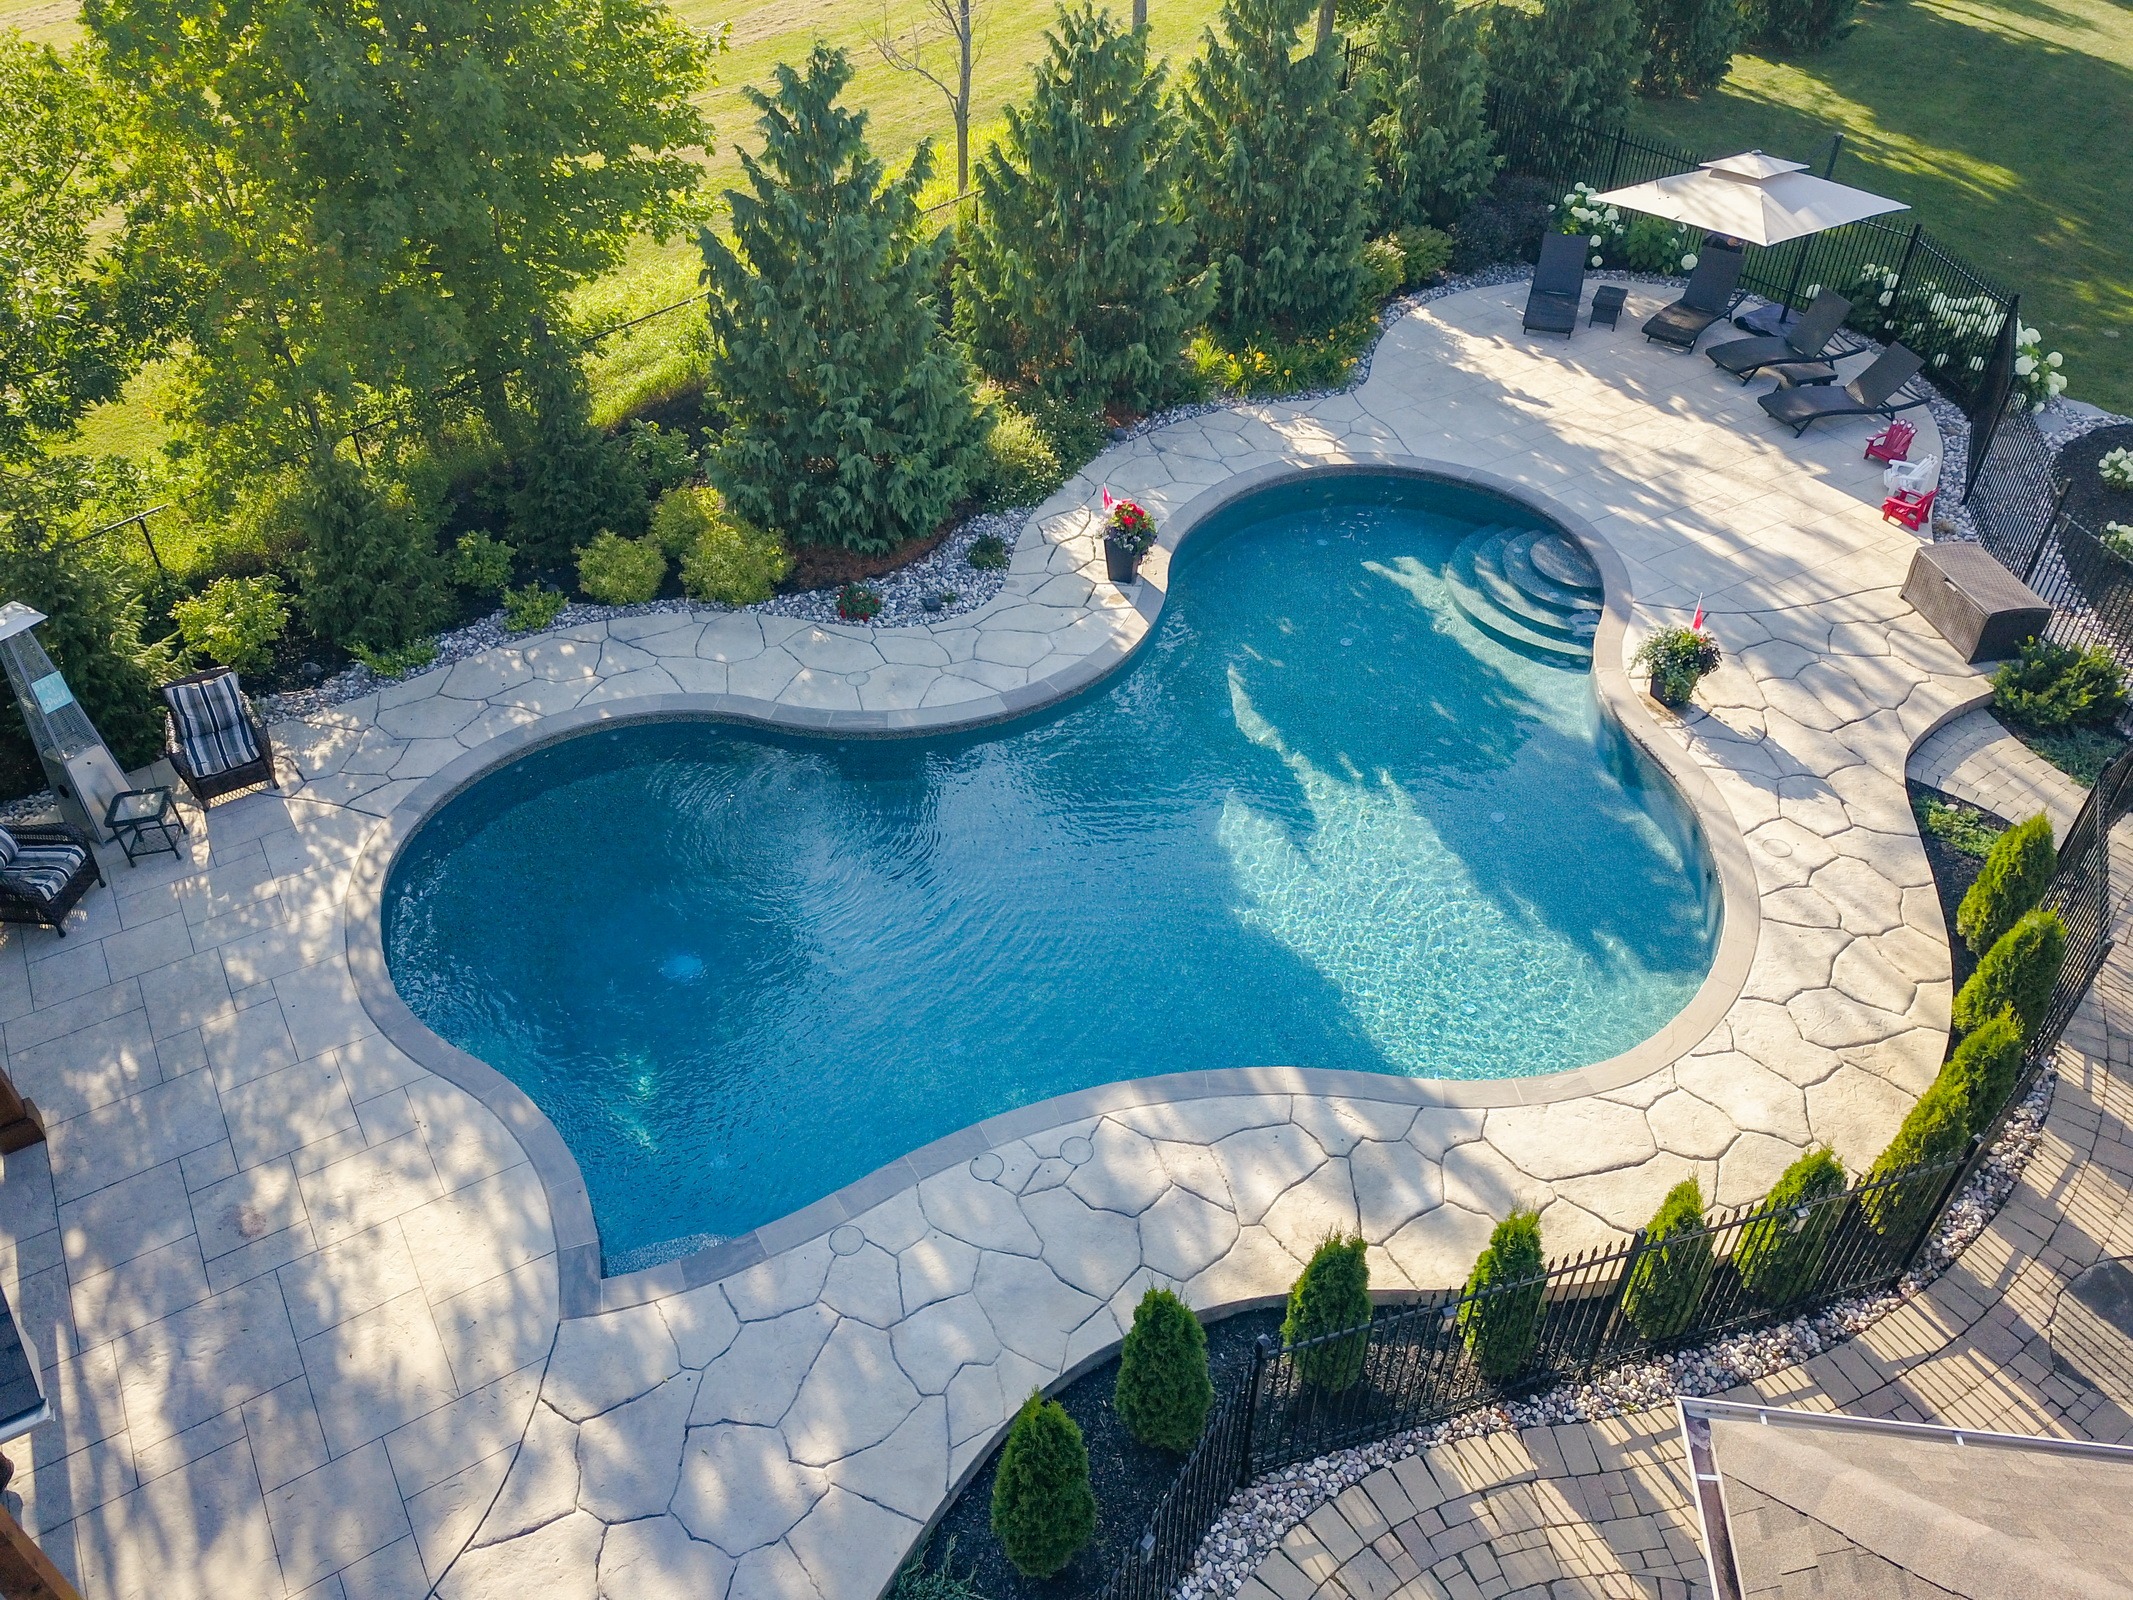 An aerial view of a residential backyard featuring a kidney-shaped swimming pool, patio with furniture, umbrellas, neatly landscaped garden, and trees.